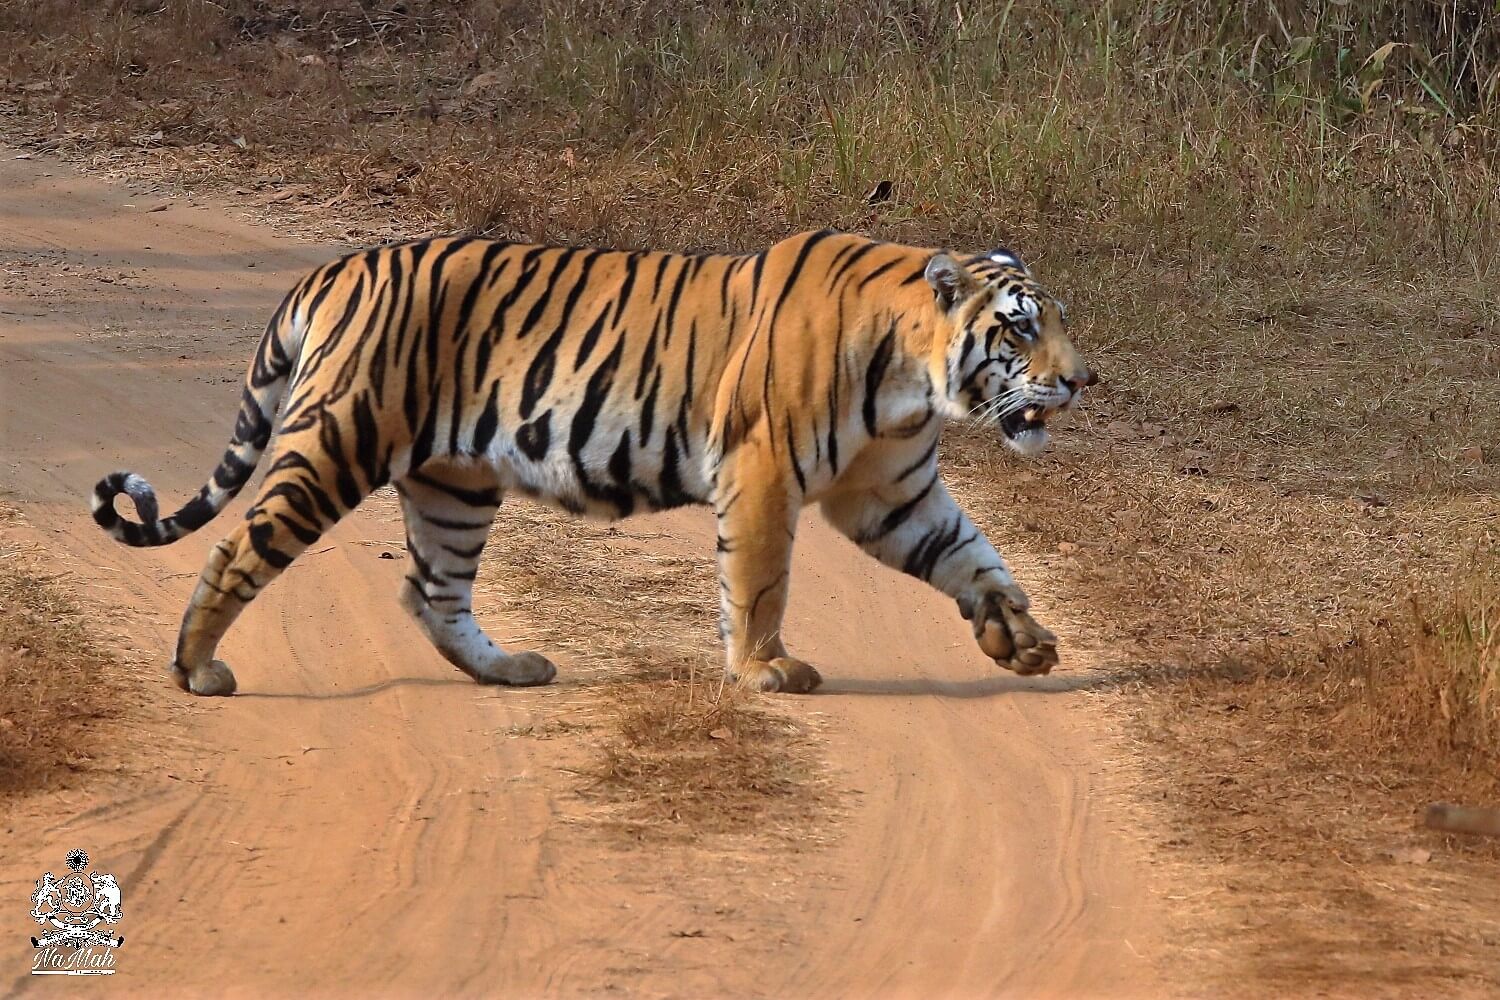 Tiger crossing road, right flank photograph
